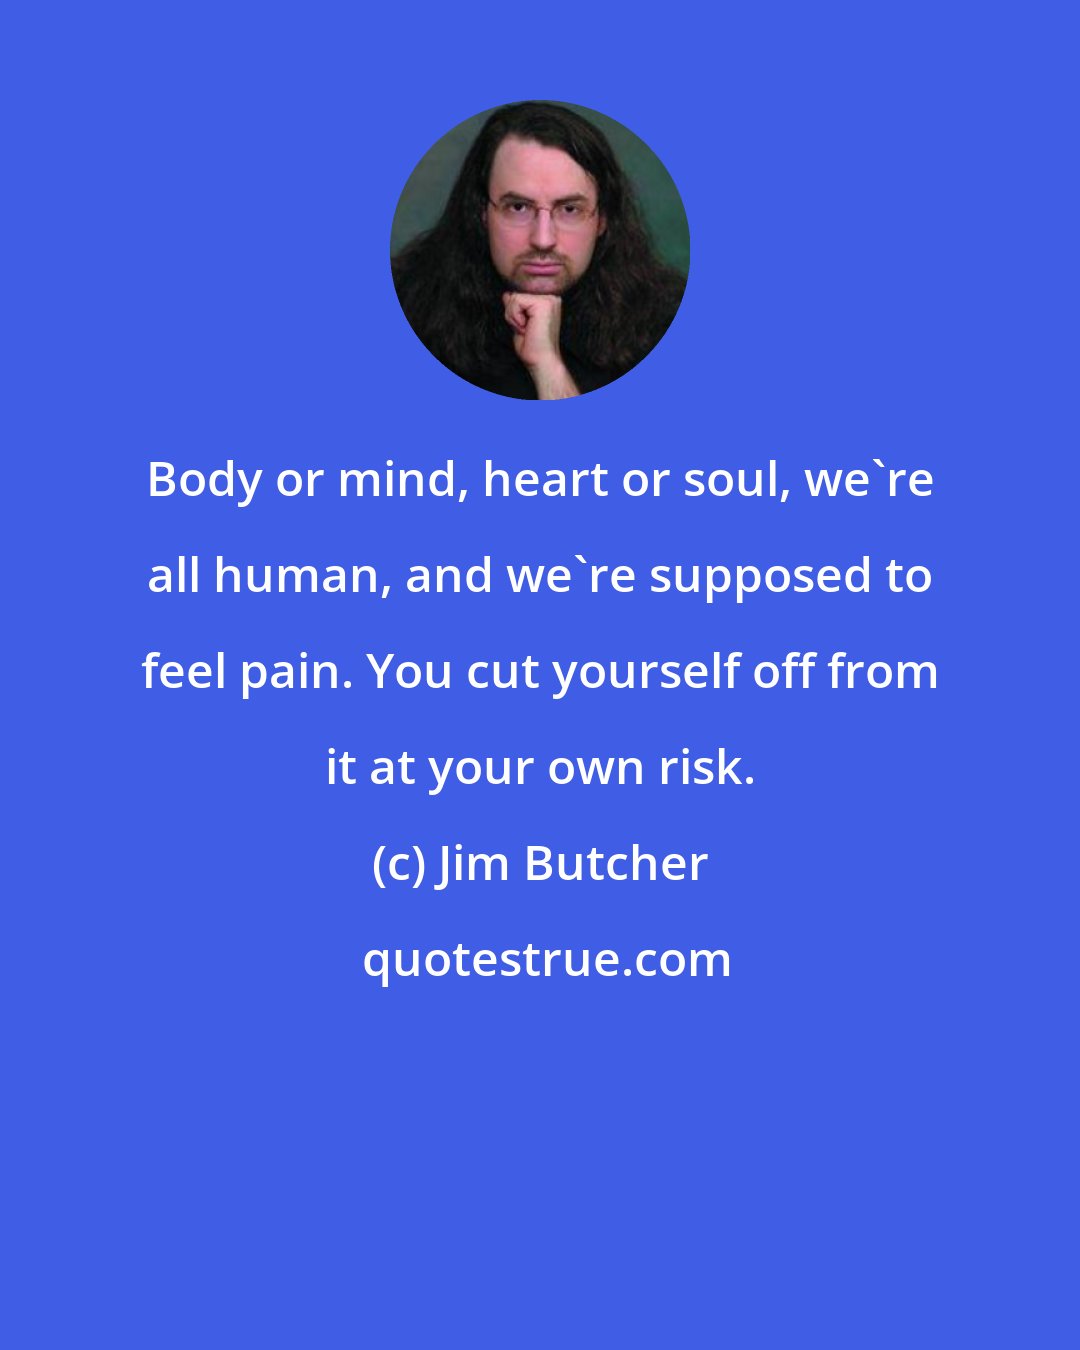 Jim Butcher: Body or mind, heart or soul, we're all human, and we're supposed to feel pain. You cut yourself off from it at your own risk.